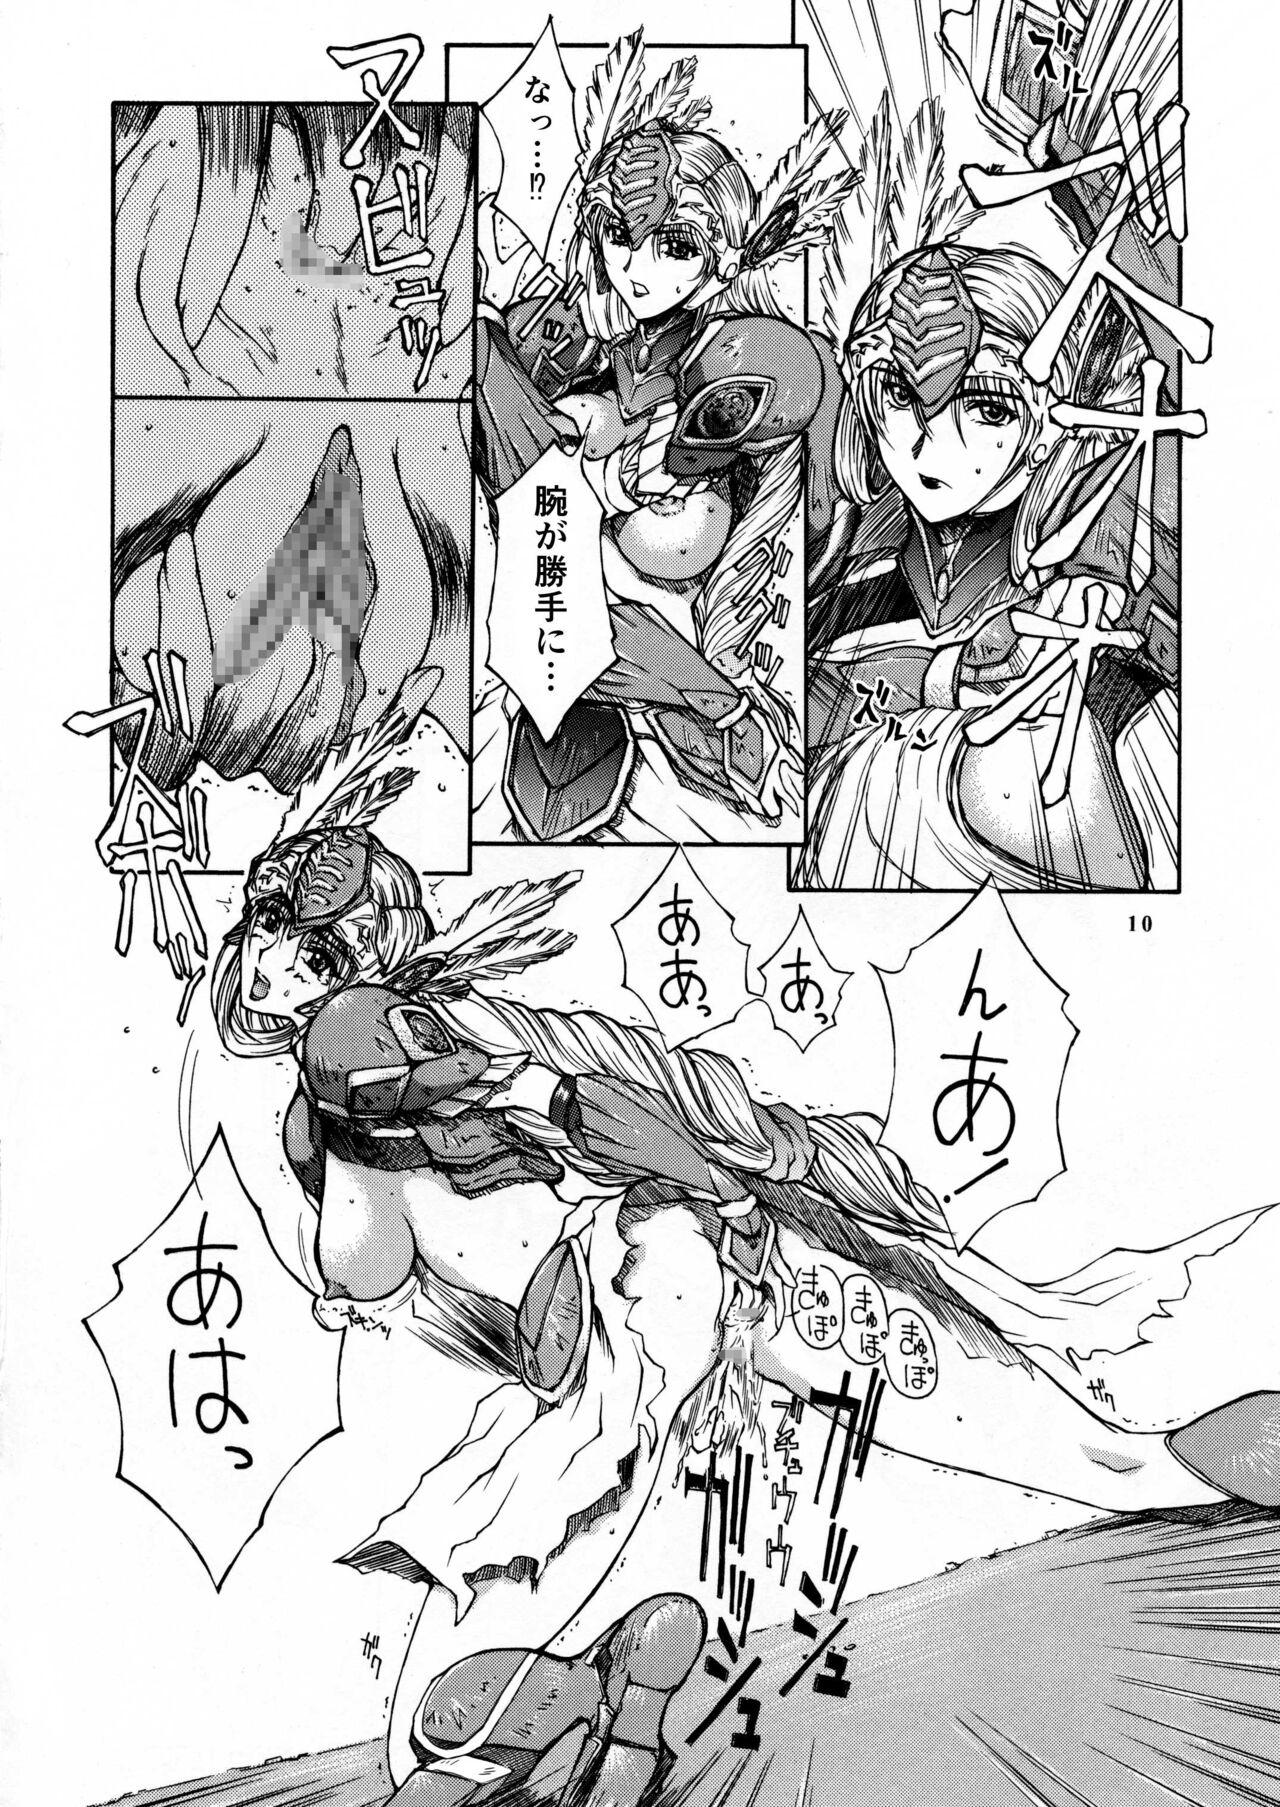 Blowjob Contest Leathered Castle - Valkyrie profile Blow Job Movies - Page 7